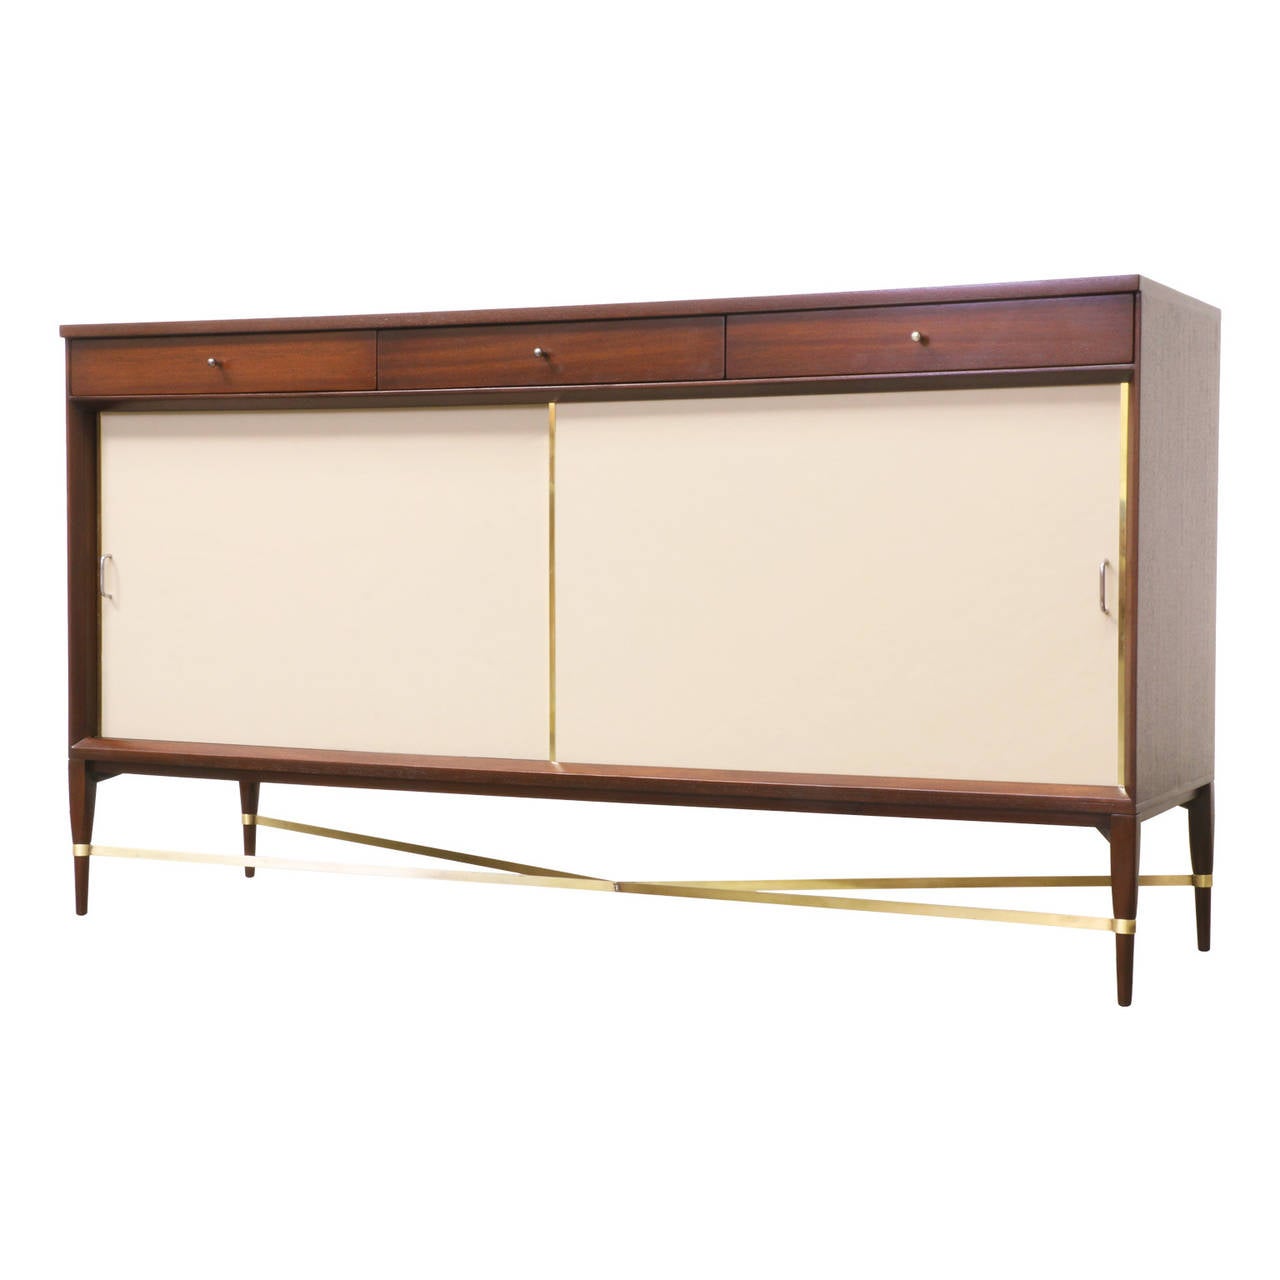 Designer: Paul McCobb.
Manufacturer: Calvin Group.
Period/Style: Mid-Century Modern.
Country: United States.
Date: 1950s.

Dimensions: 36.25